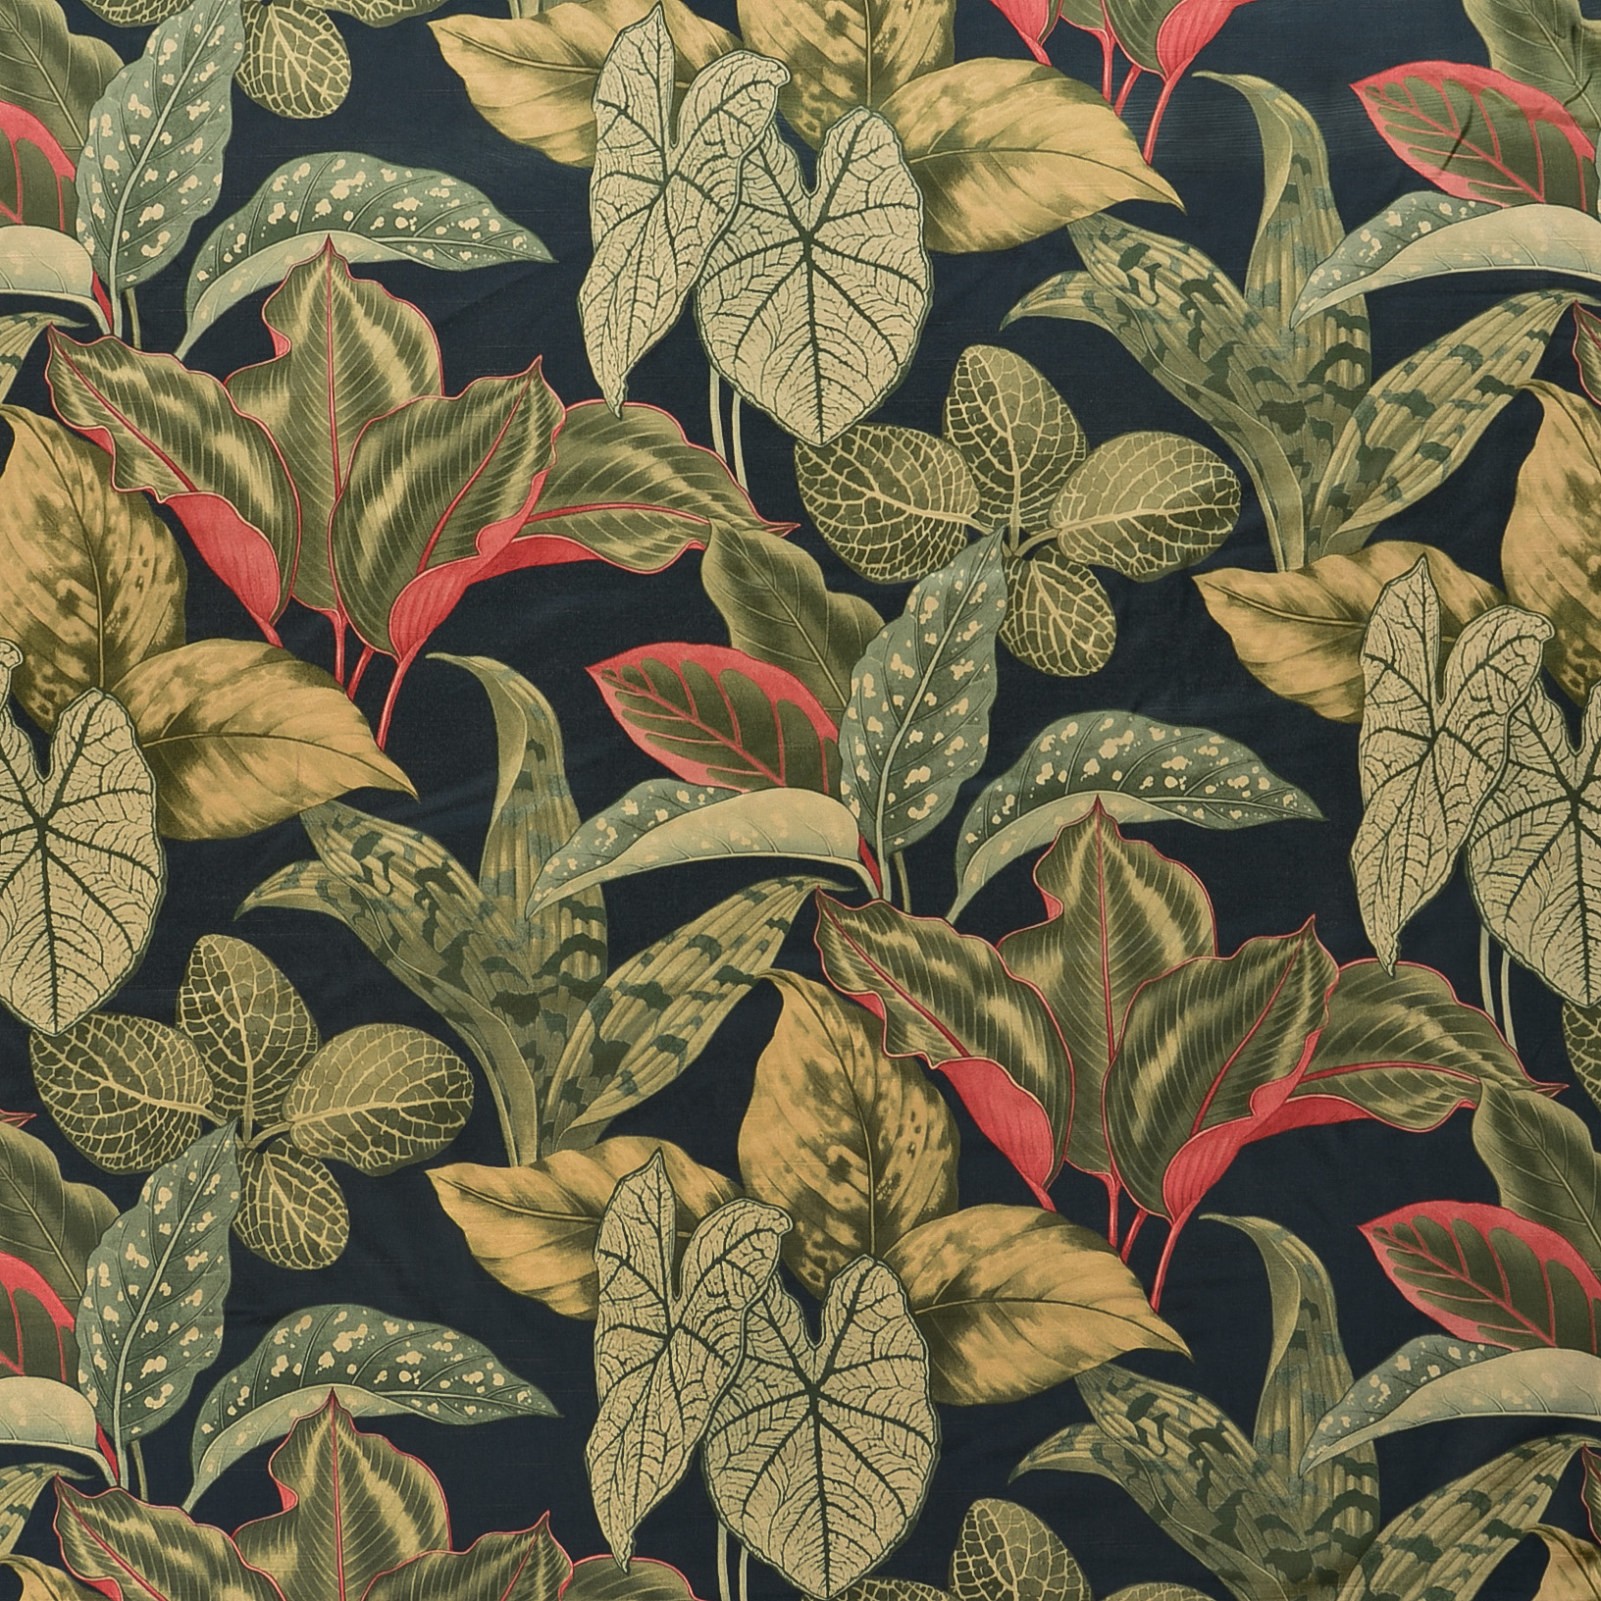 Laguna Black and Green Leaf Satin Drapery and Upholstery Fabric by the yard